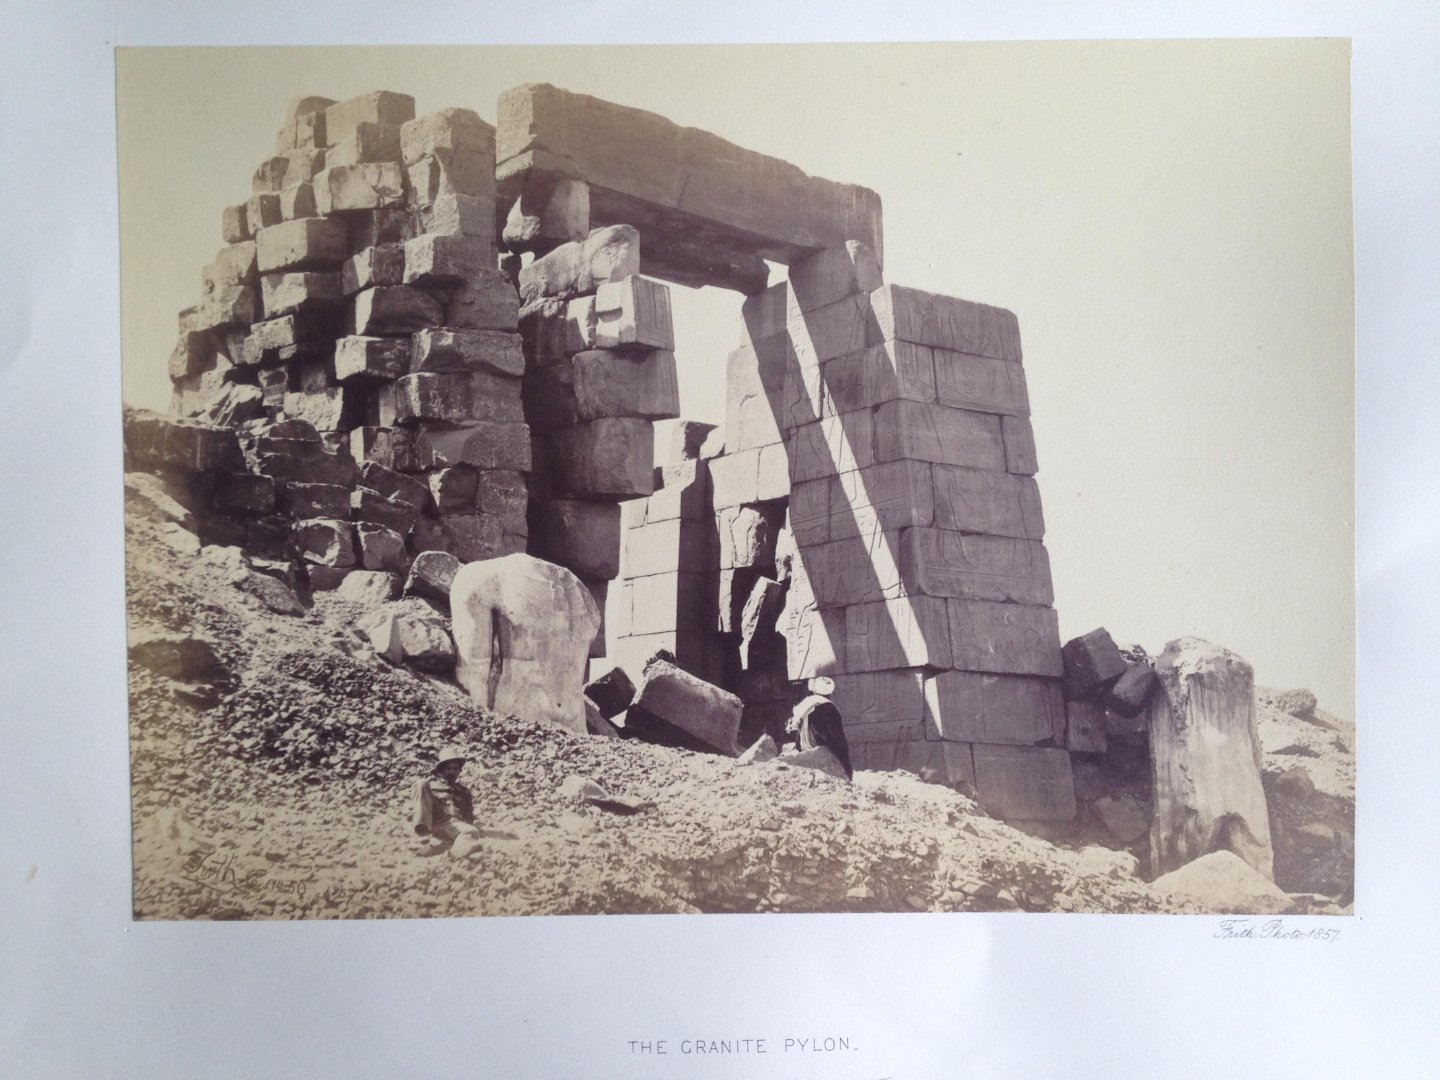 Frith, Francis - The Granite Pylon, Thebes, Series Egypt and Palestine